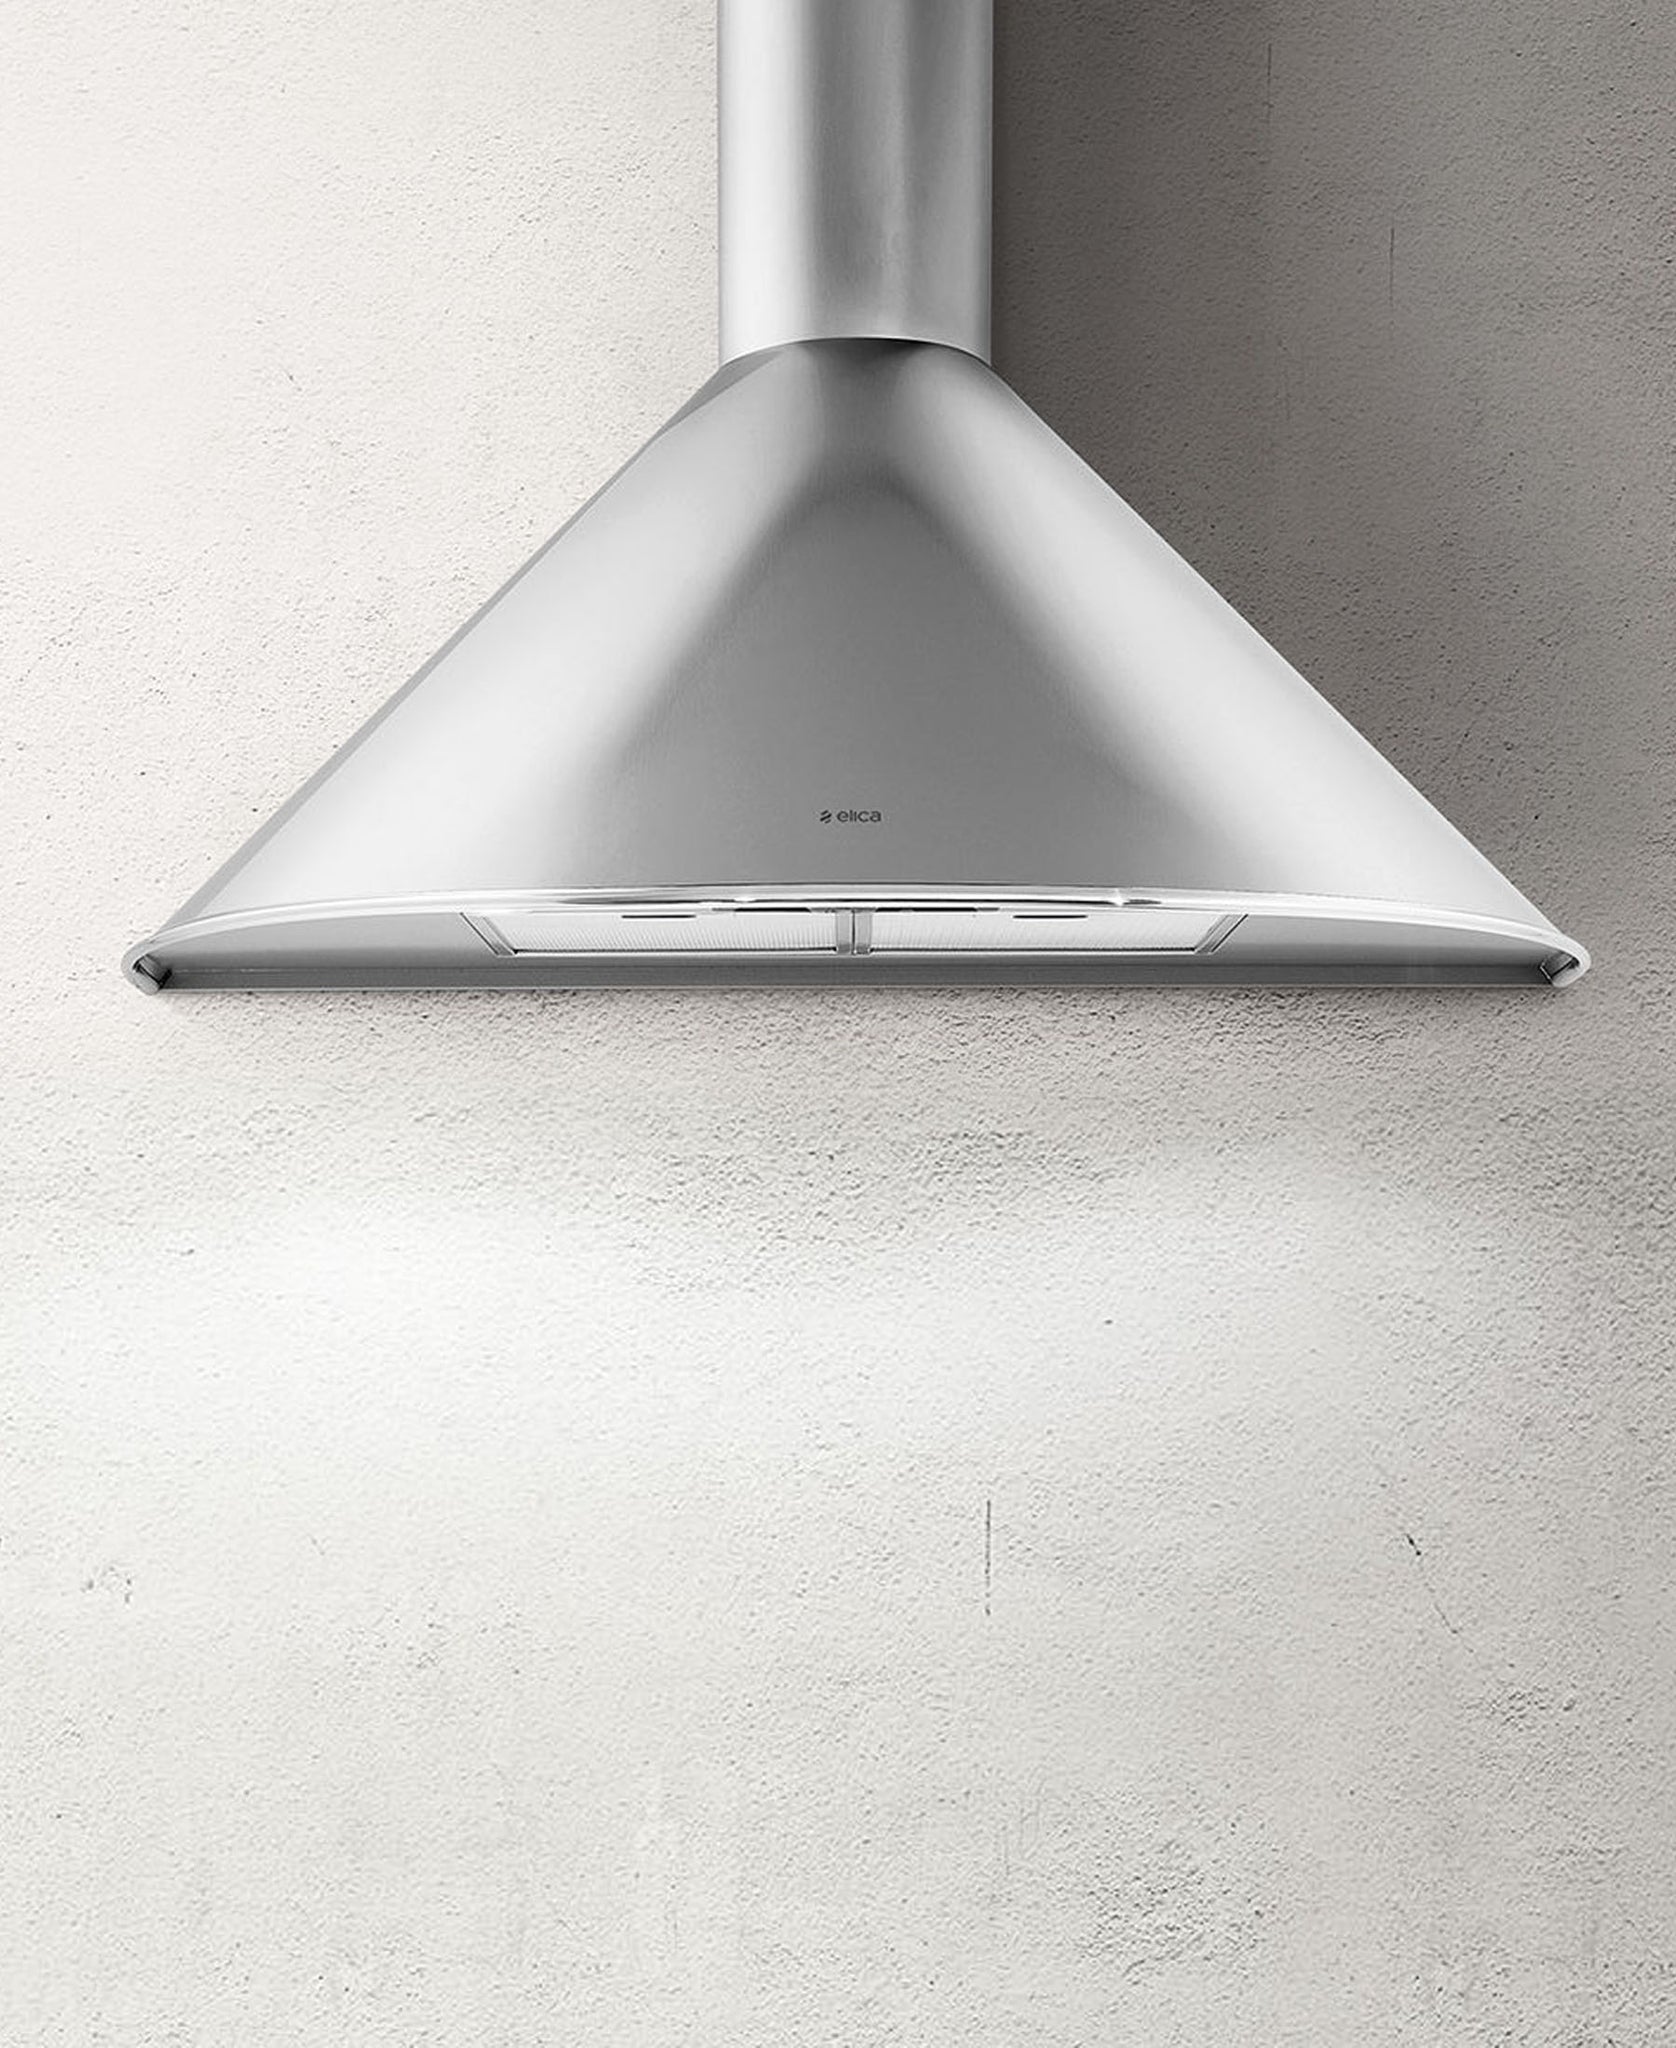 ELICA 60CM CONE SHAPED COOKER HOOD WITH CURVED CHIMNEY-10/ELICA TONDA 60